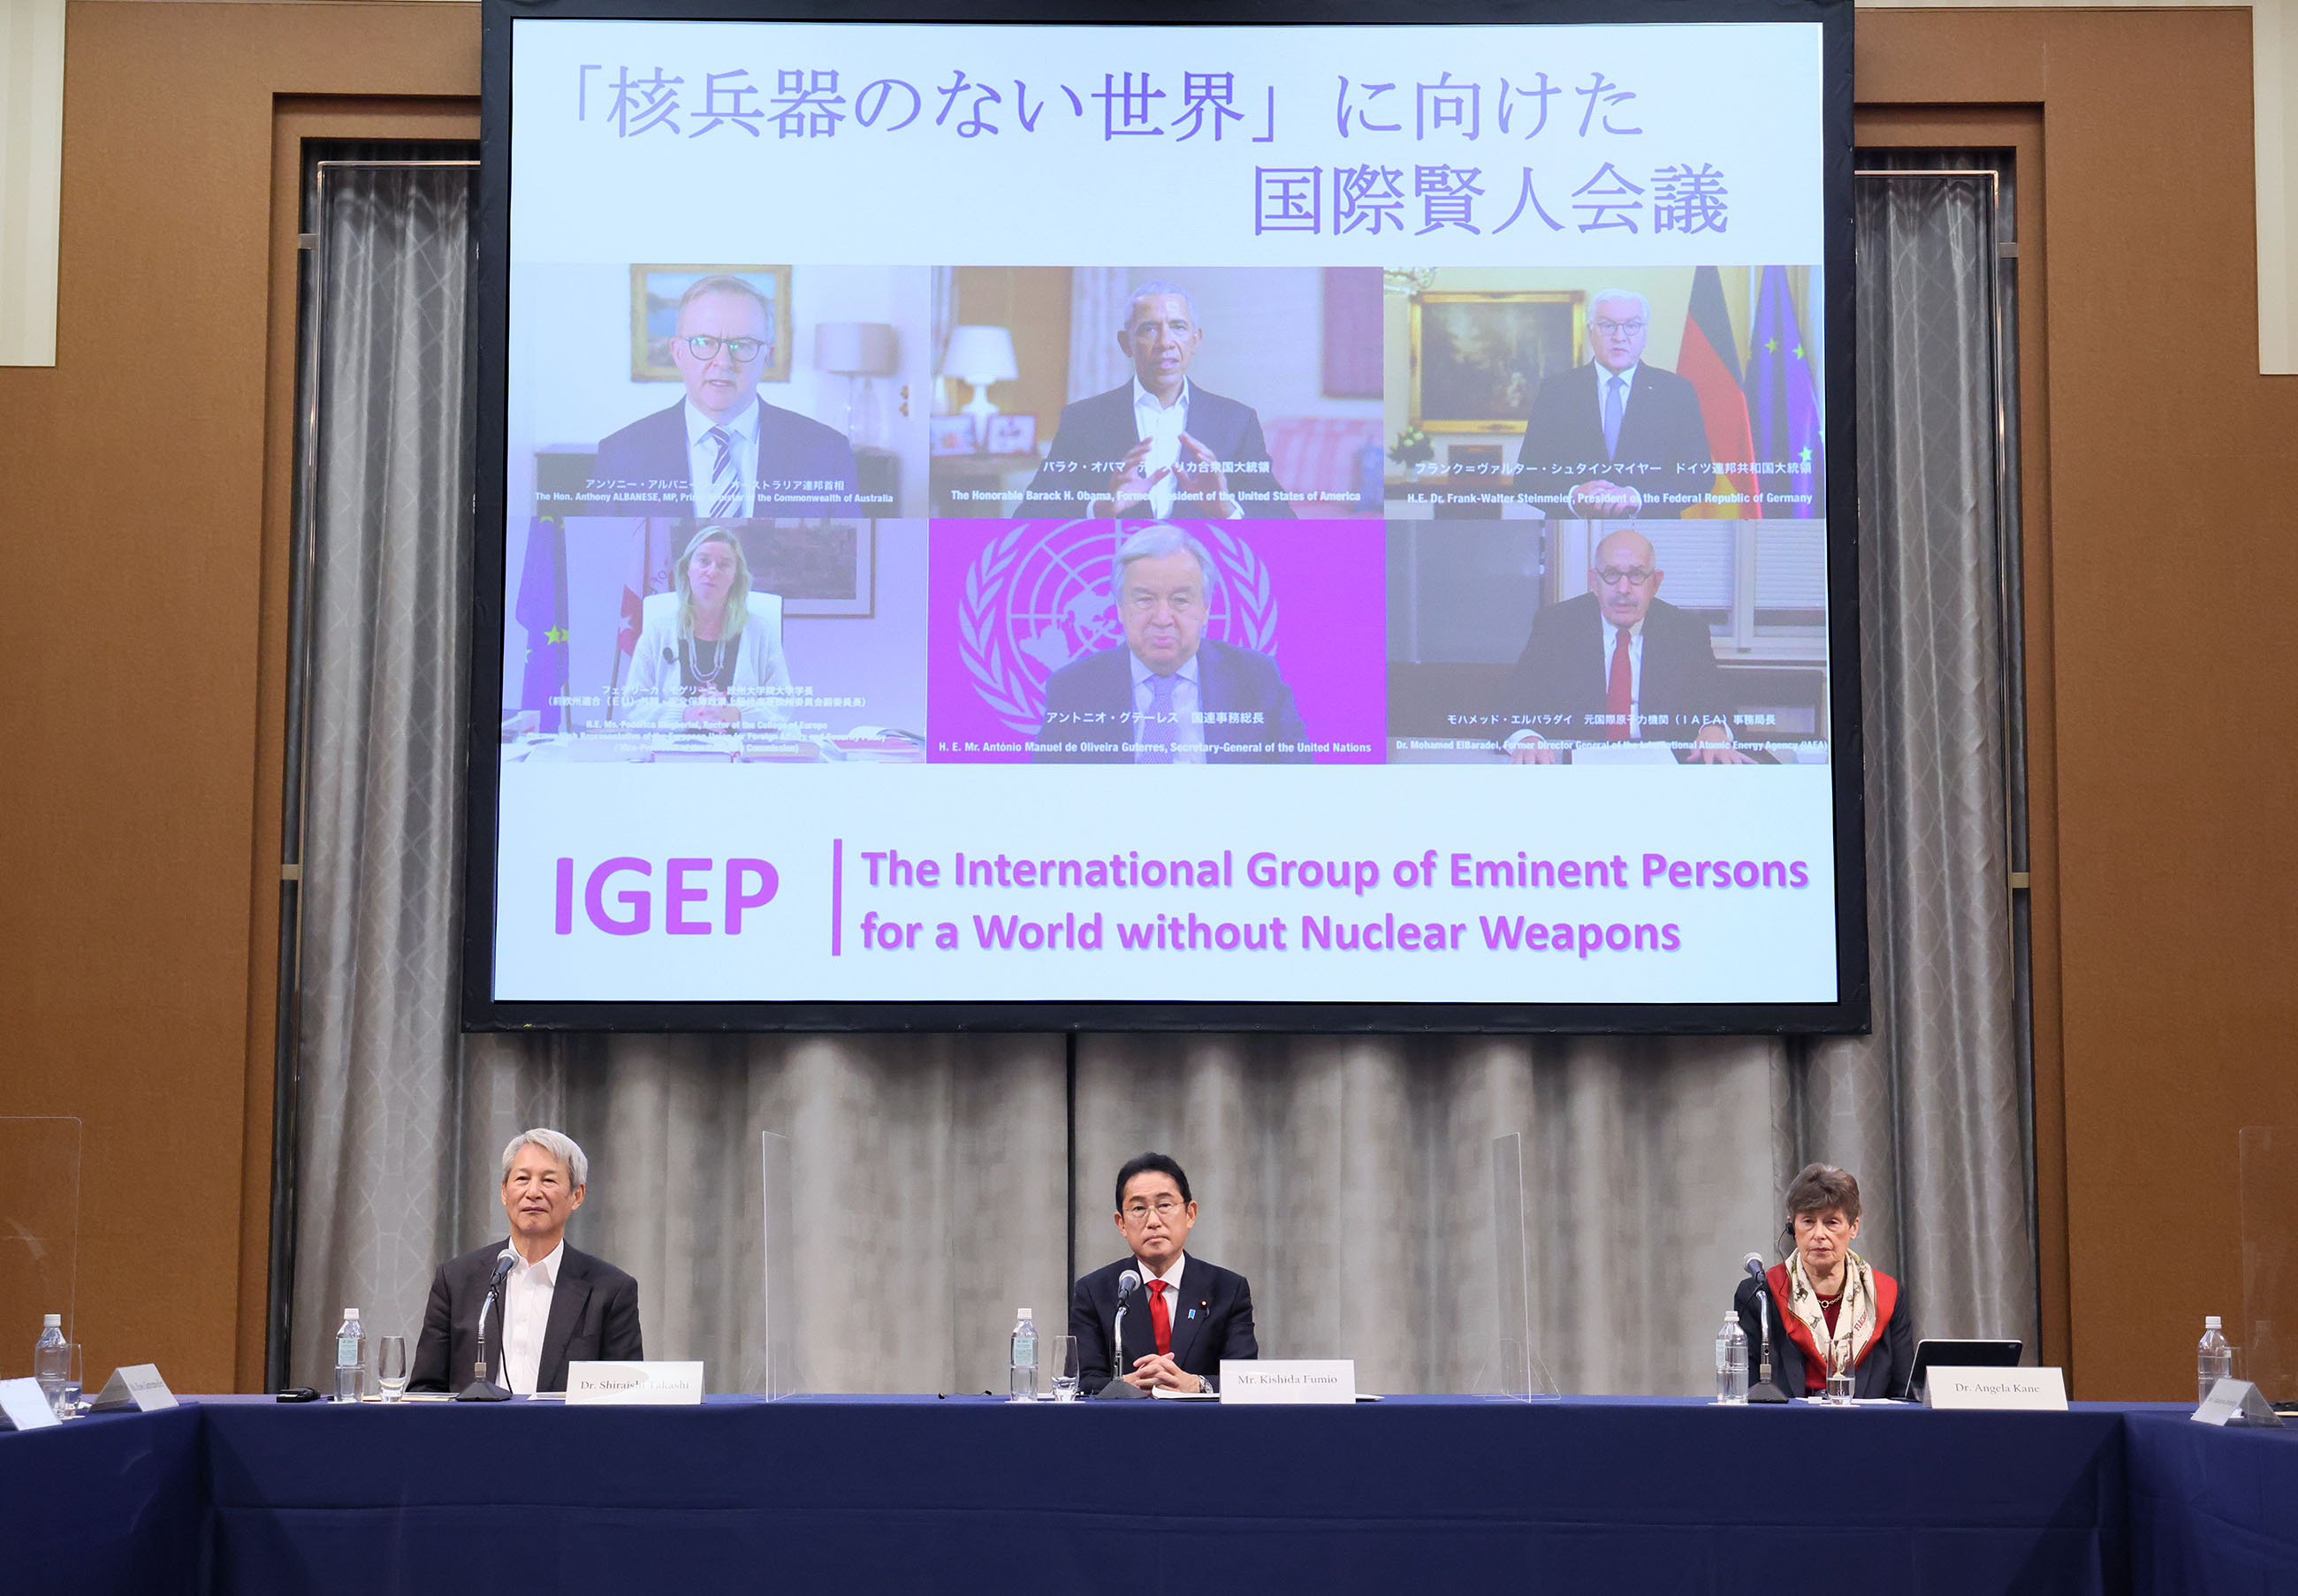 International Group of Eminent Persons for a World without Nuclear Weapons (IGEP) (1)